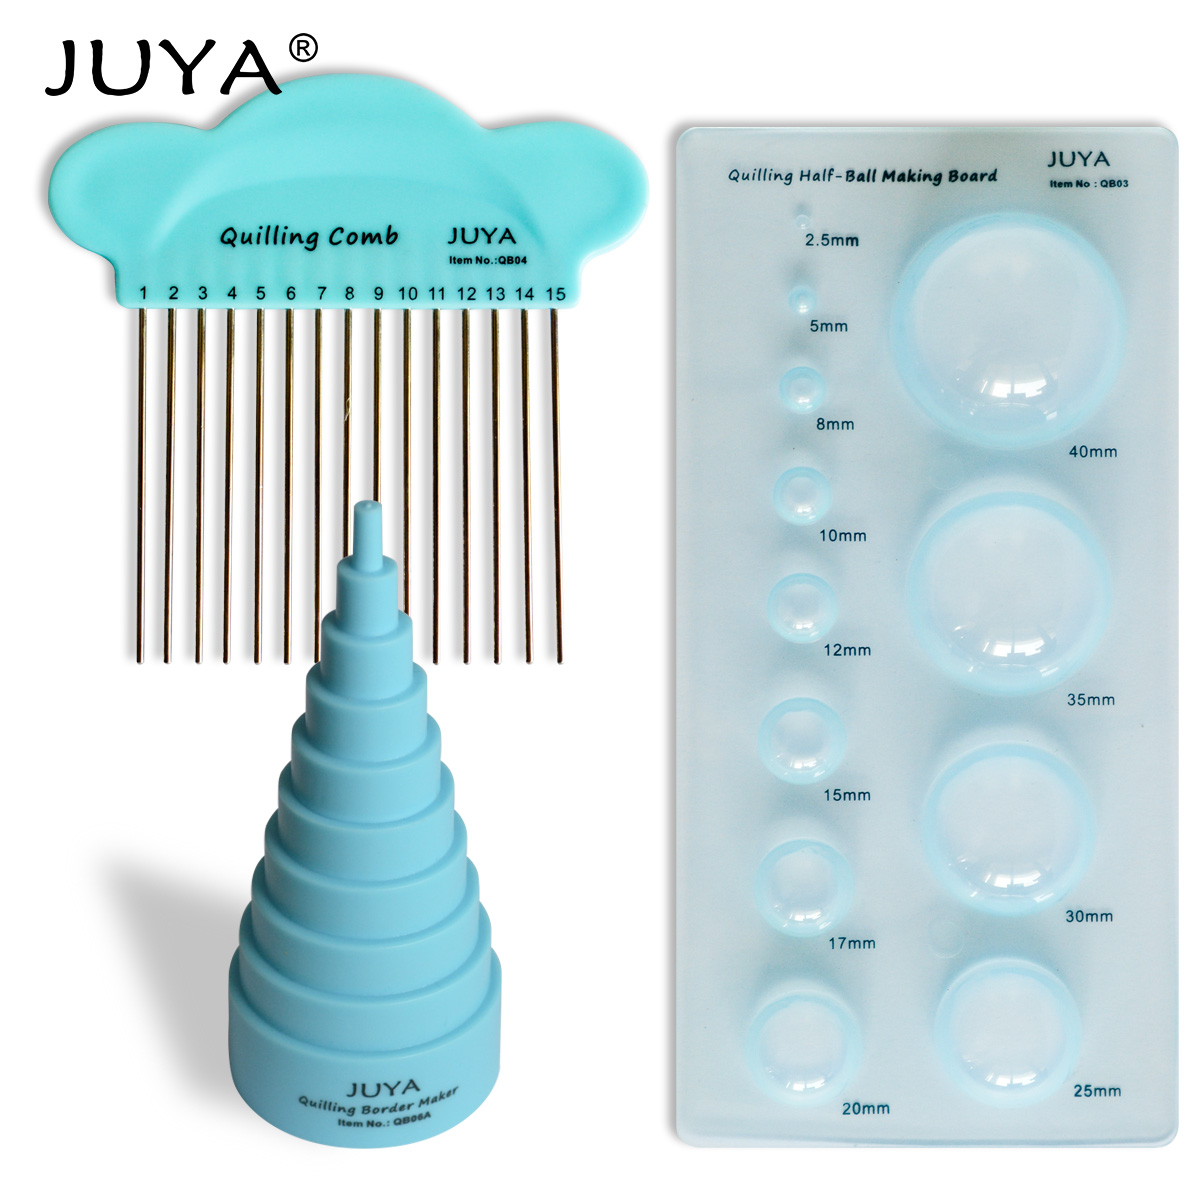 JUYA - Quilling Comb - Pink or Blue